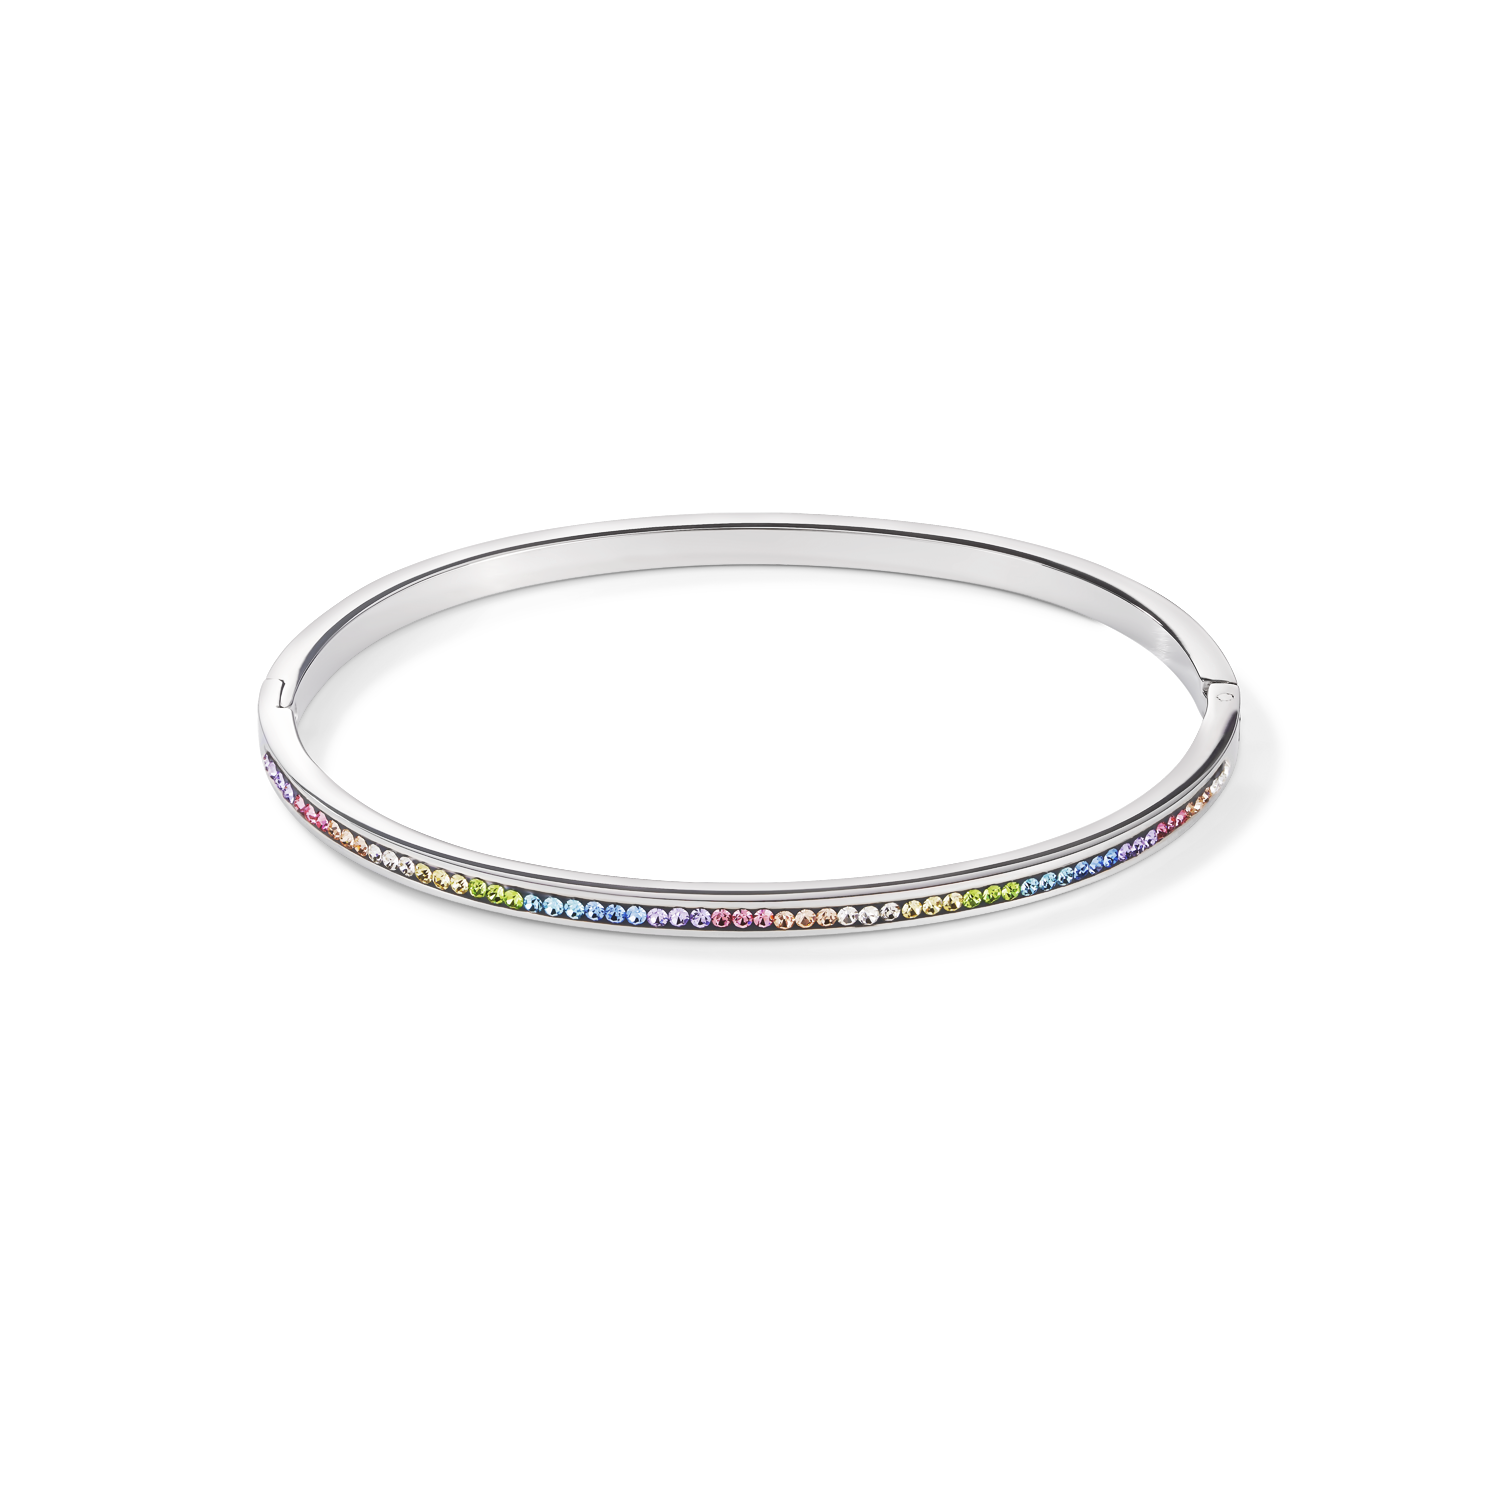 Bangle stainless steel & crystals pavé multicolour pastel 17